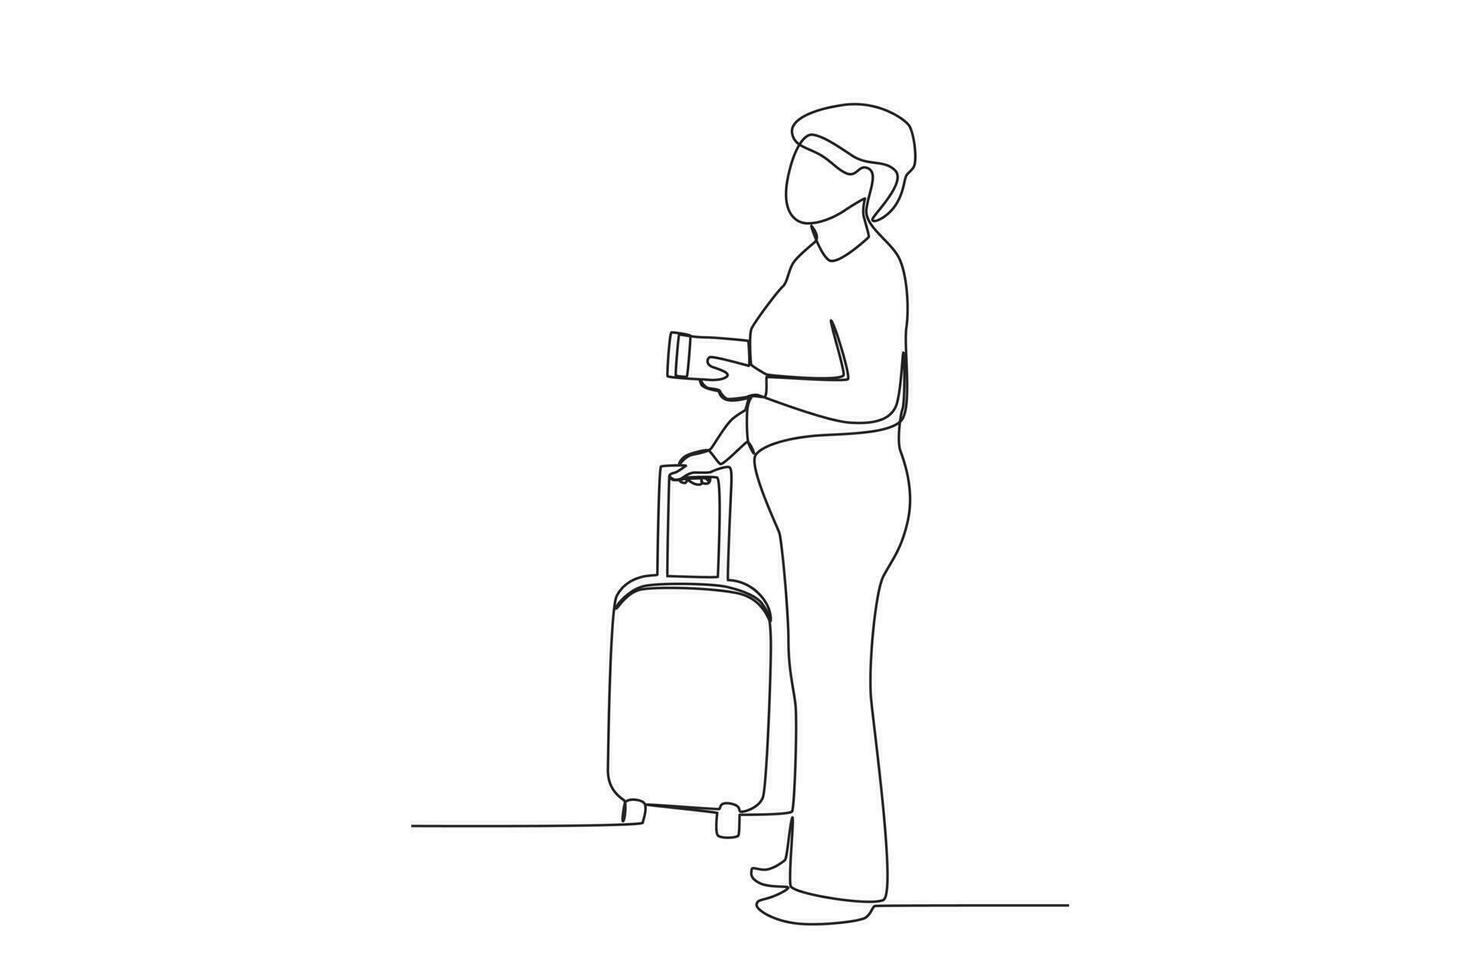 A passenger holds a ticket and a suitcase vector